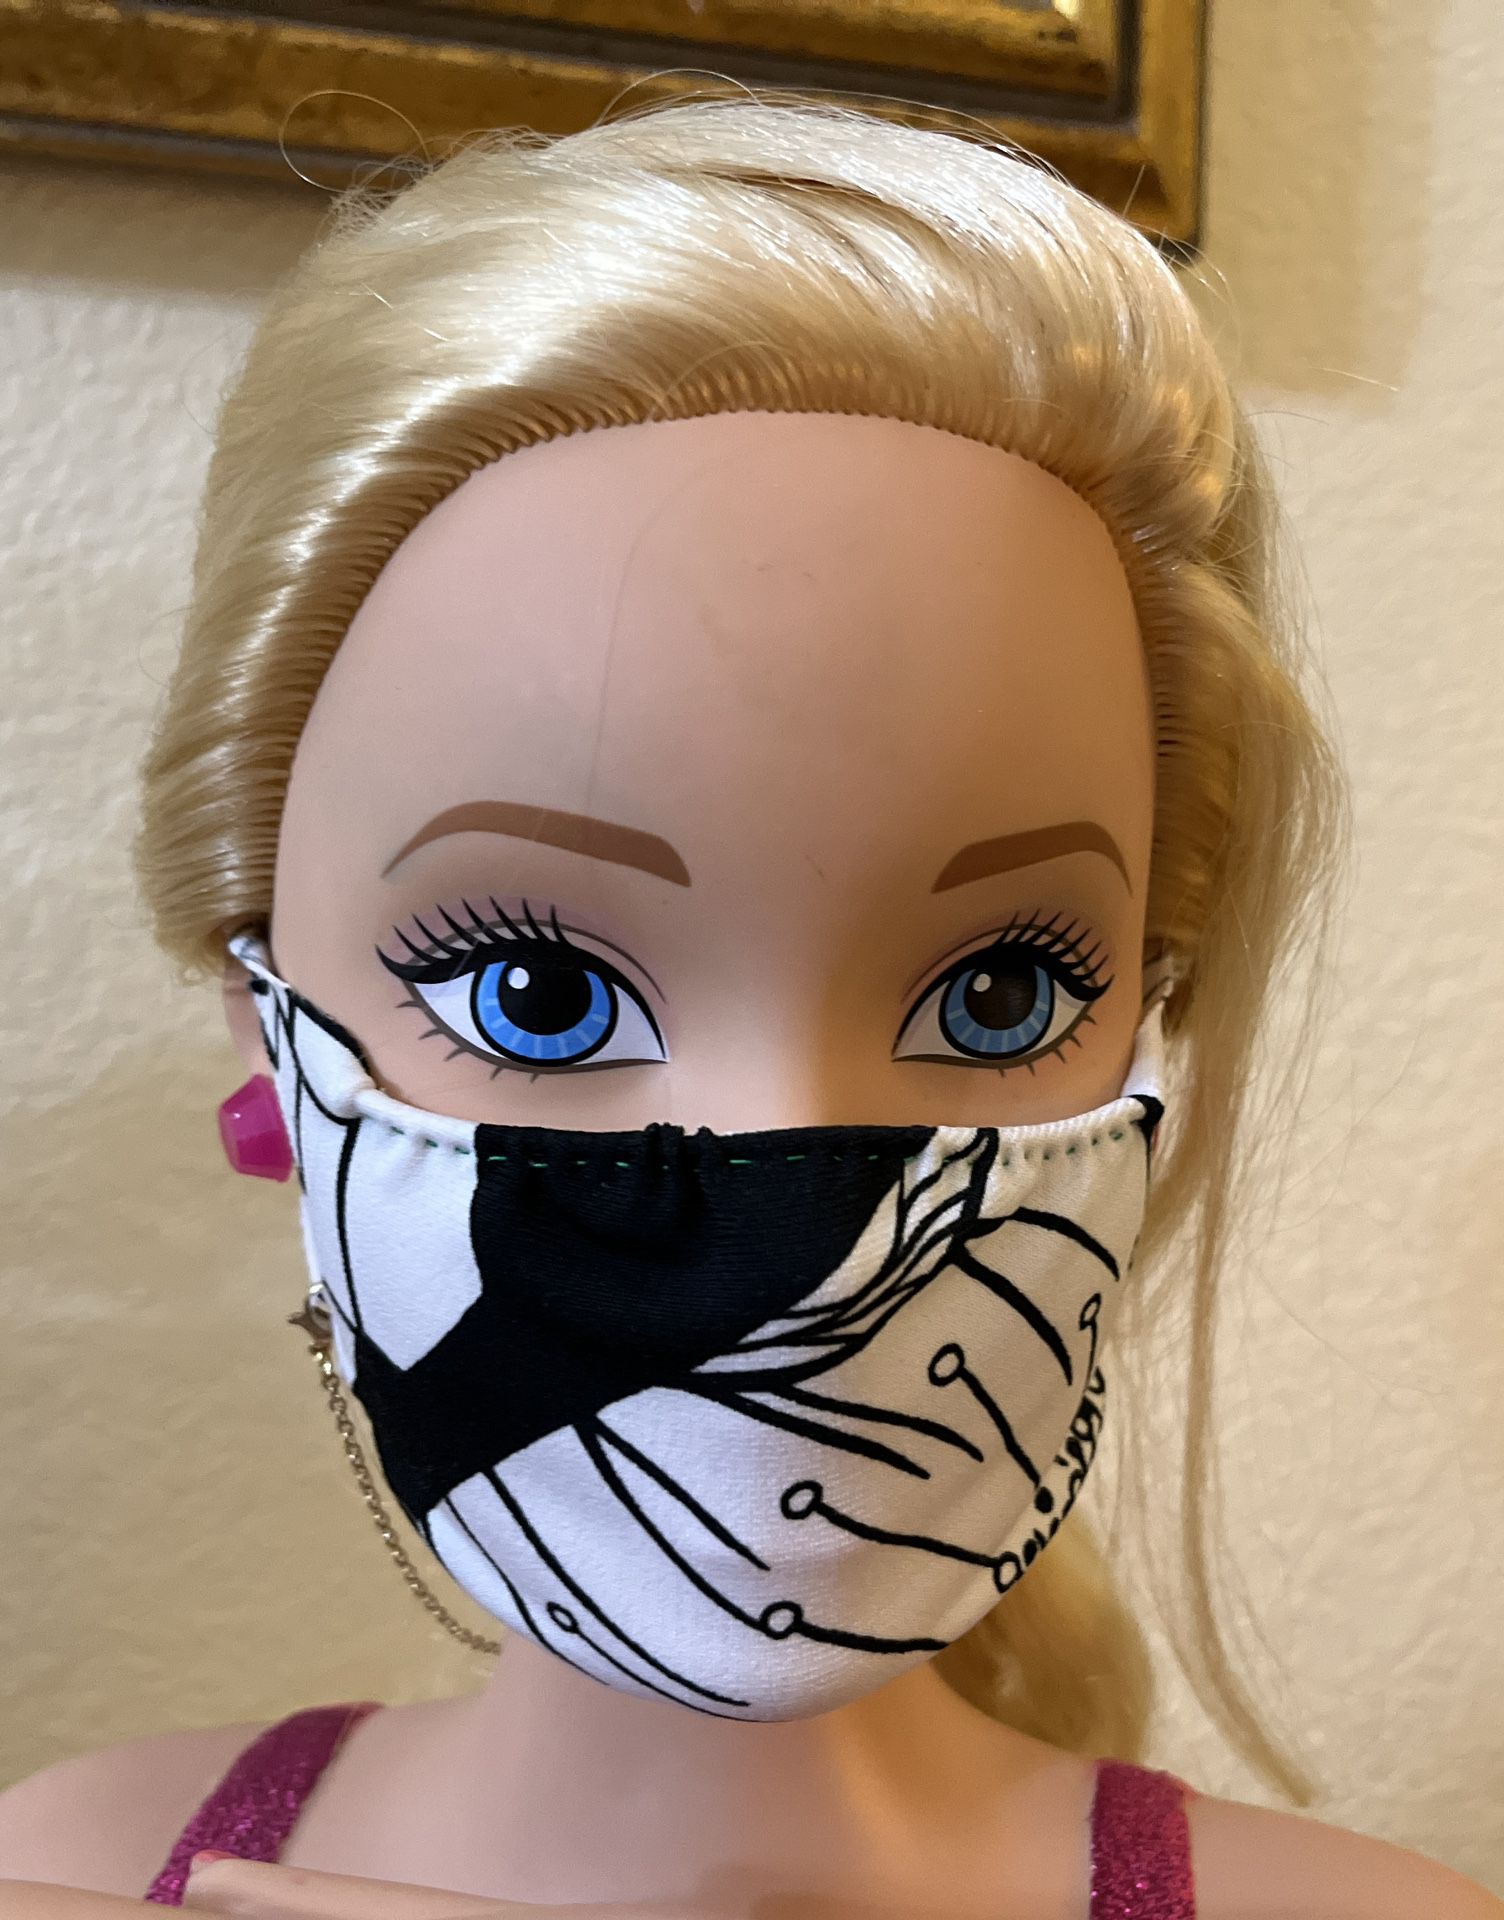 Masked Barbie Beauty head with hands